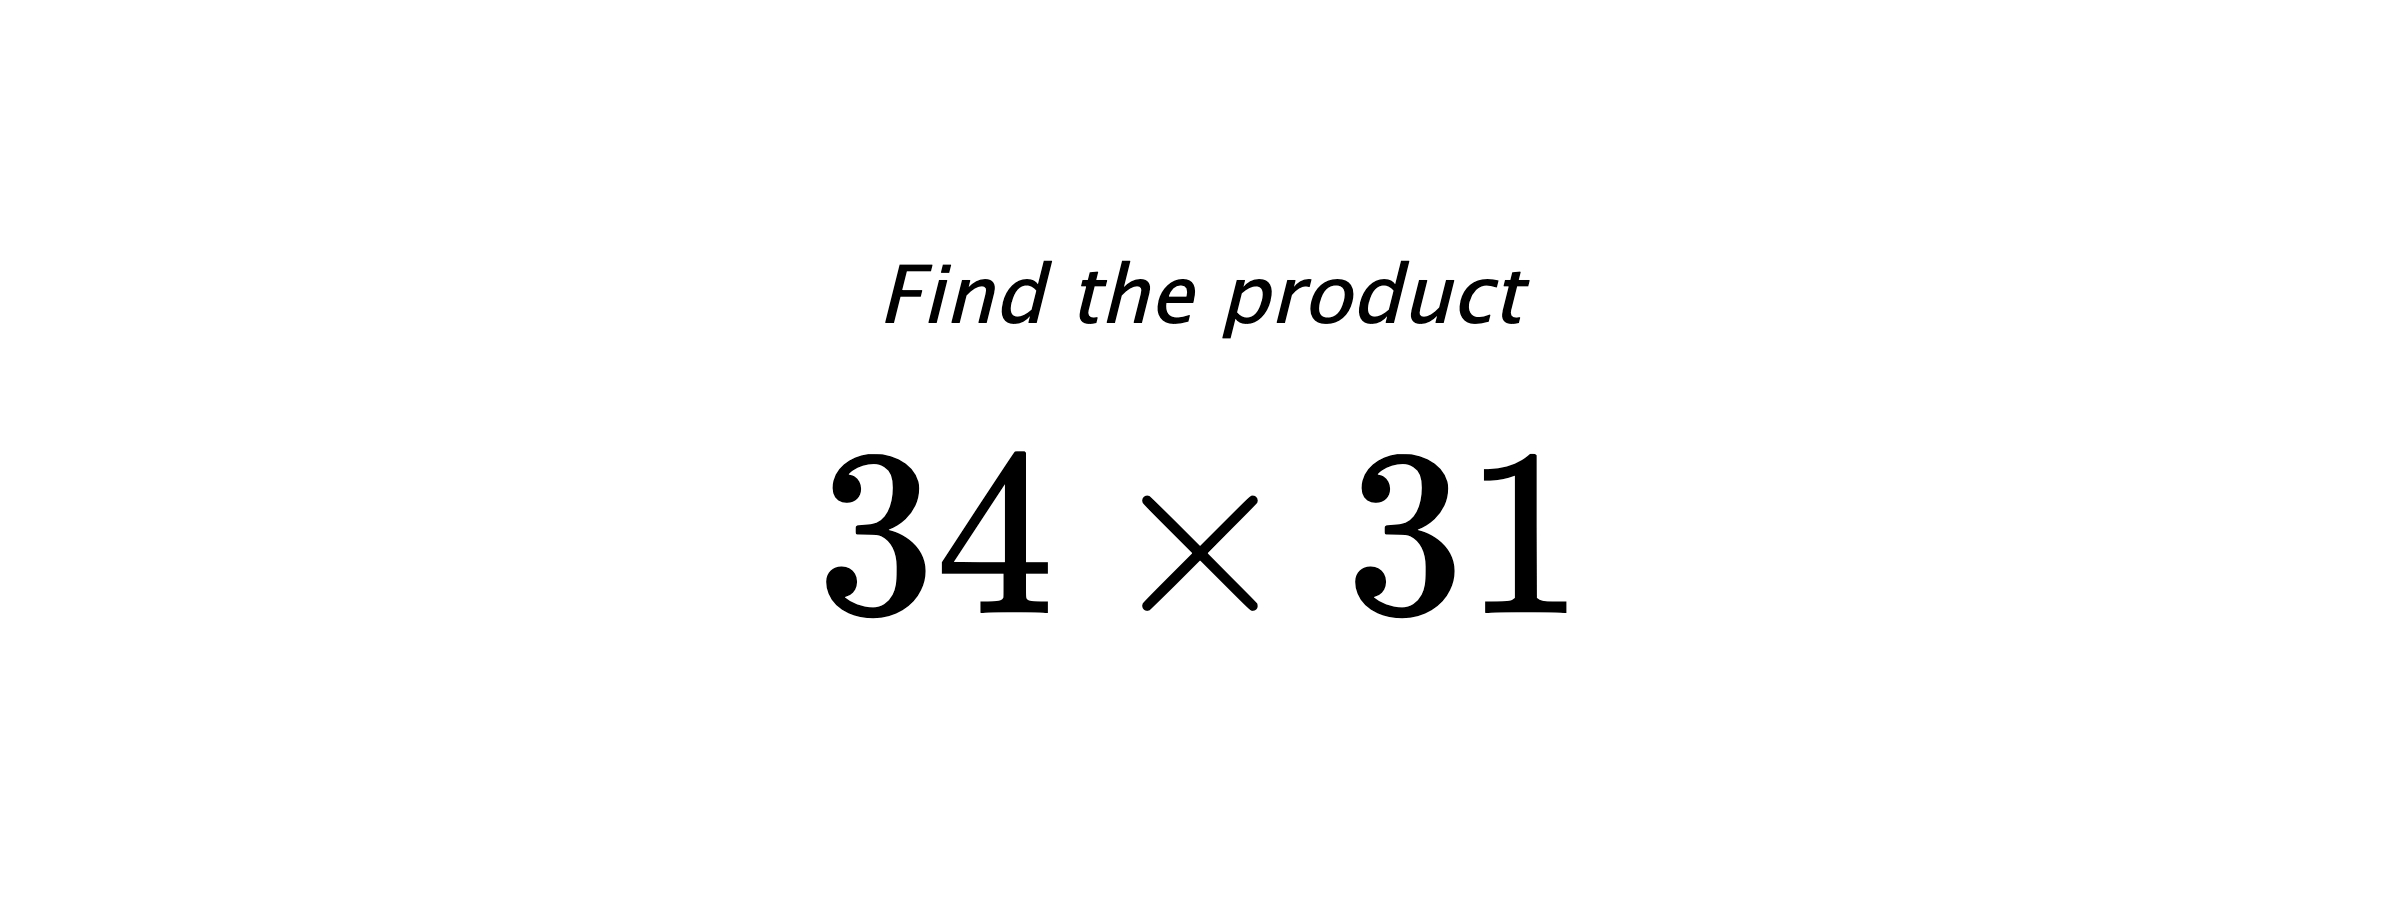 Find the product $ 34 \times 31 $